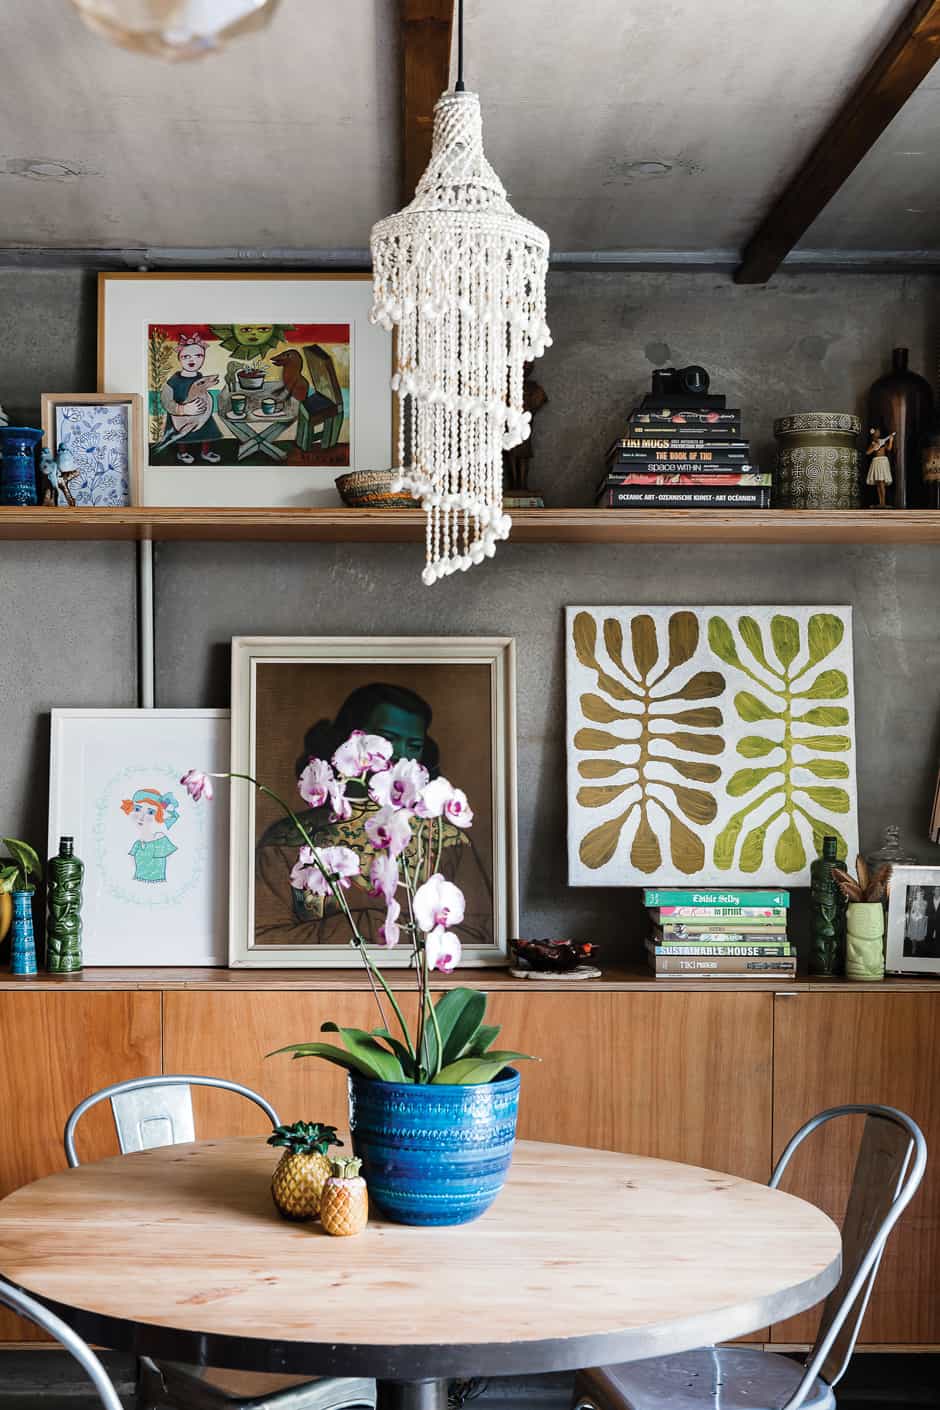 SHELVE IT In the dining area, where the family gathers at the $20 op shop table the couple sanded and painted, Susanna’s framed illustrations rub shoulders with an eye-catching collection of vintage paintings and souvenirs, as well as pottery finds from Australia and Paul’s native New Zealand. Susanna has repurposed her favourite blue Bitossi vase as a planter for an exotic orchid.